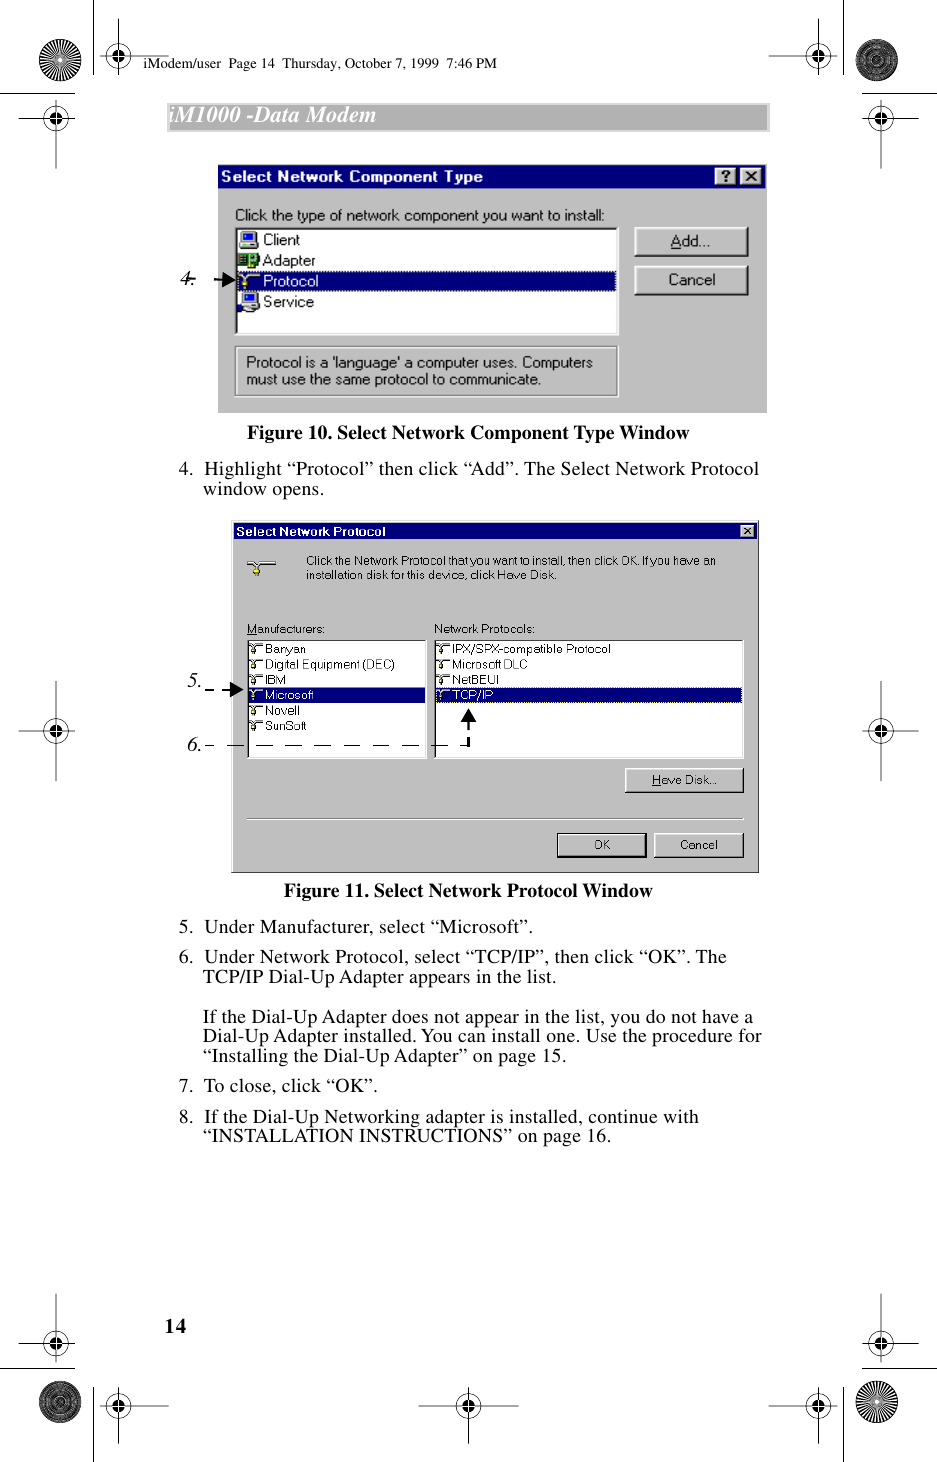  14 iM1000 -Data Modem   Figure 10. Select Network Component Type Window   4.  Highlight “Protocol” then click “Add”. The Select Network Protocol window opens. Figure 11. Select Network Protocol Window   5.  Under Manufacturer, select “Microsoft”.  6.  Under Network Protocol, select “TCP/IP”, then click “OK”. The TCP/IP Dial-Up Adapter appears in the list.If the Dial-Up Adapter does not appear in the list, you do not have a Dial-Up Adapter installed. You can install one. Use the procedure for “Installing the Dial-Up Adapter” on page 15.  7.  To close, click “OK”.  8.  If the Dial-Up Networking adapter is installed, continue with “INSTALLATION INSTRUCTIONS” on page 16.4.6.5. iModem/user  Page 14  Thursday, October 7, 1999  7:46 PM